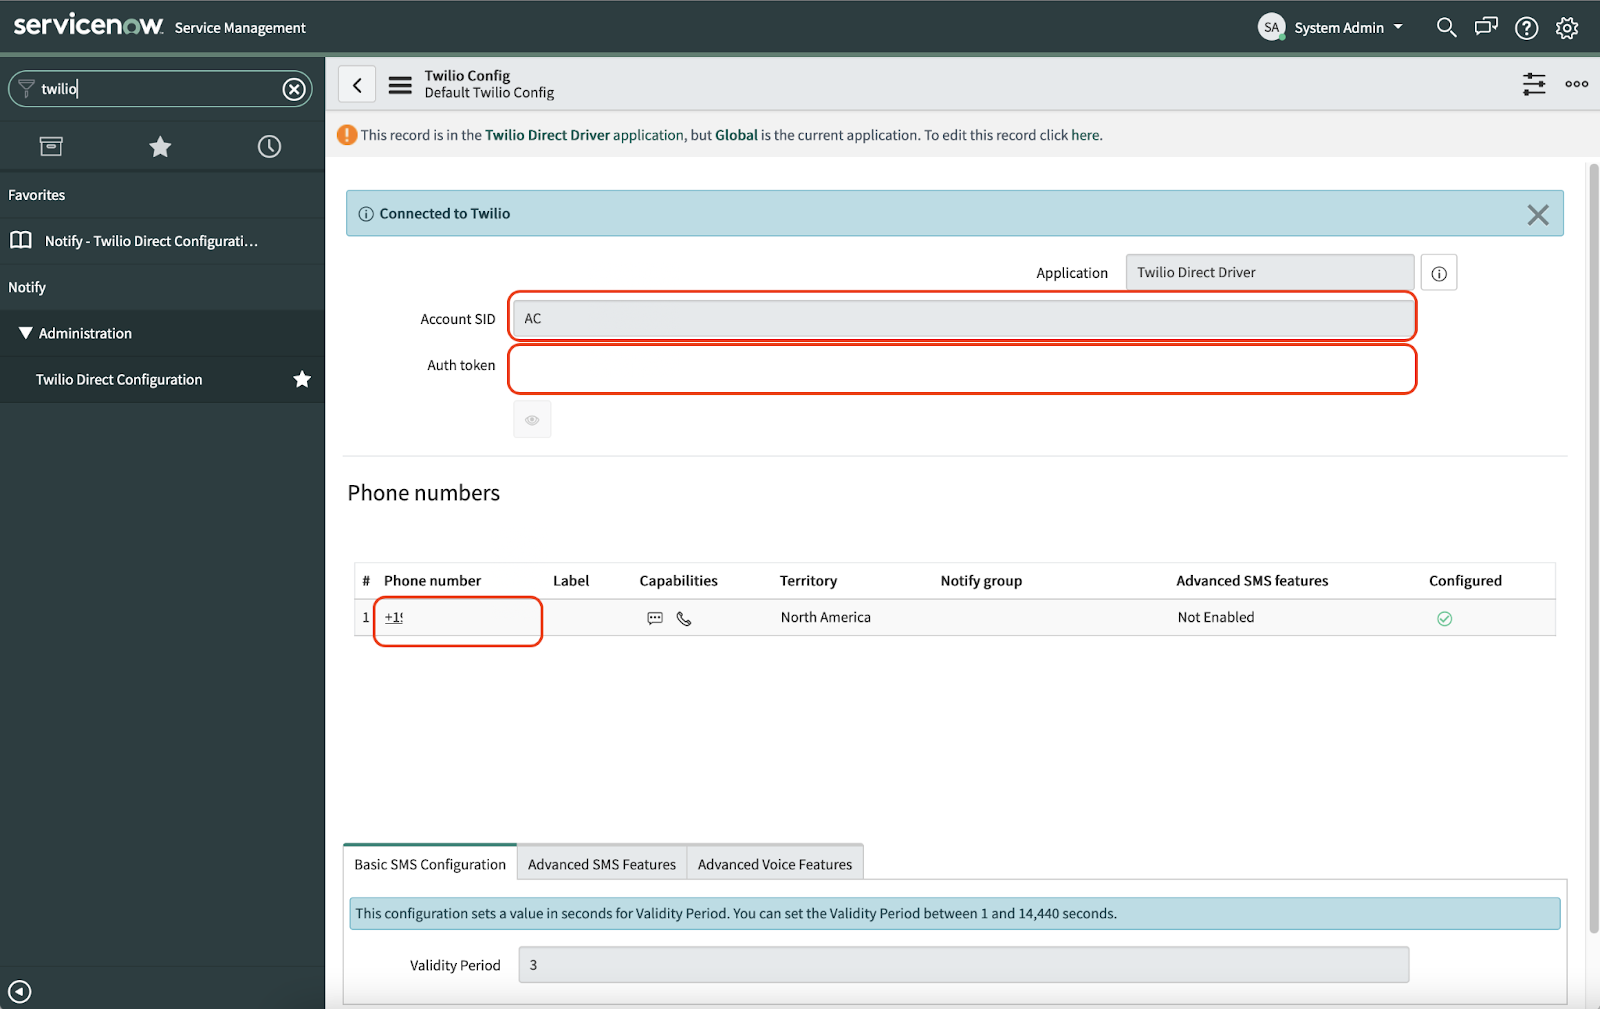 A screenshot of the Twilio configuration section of the ServiceNow dashboard